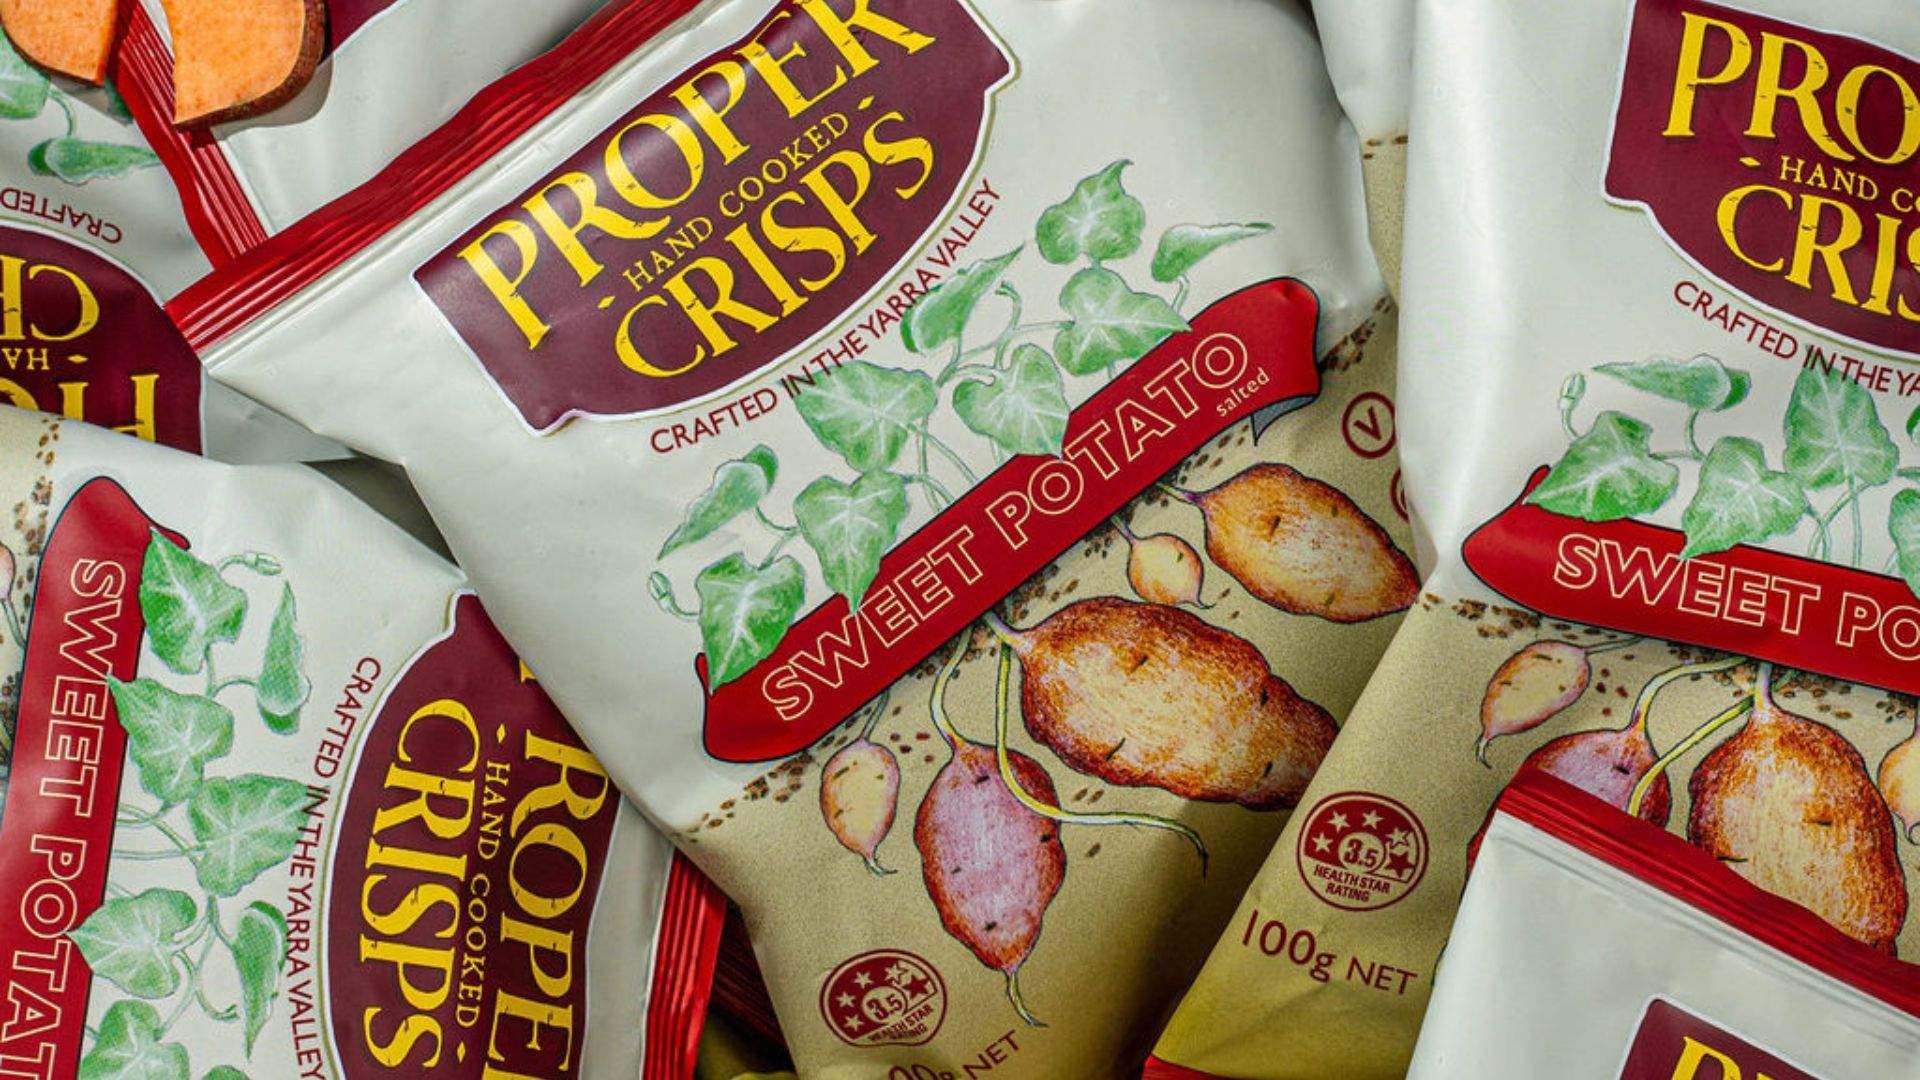 Proper Crisps Has Made a Big Change to One Key Ingredient Thanks to Our Mates Across the Ditch